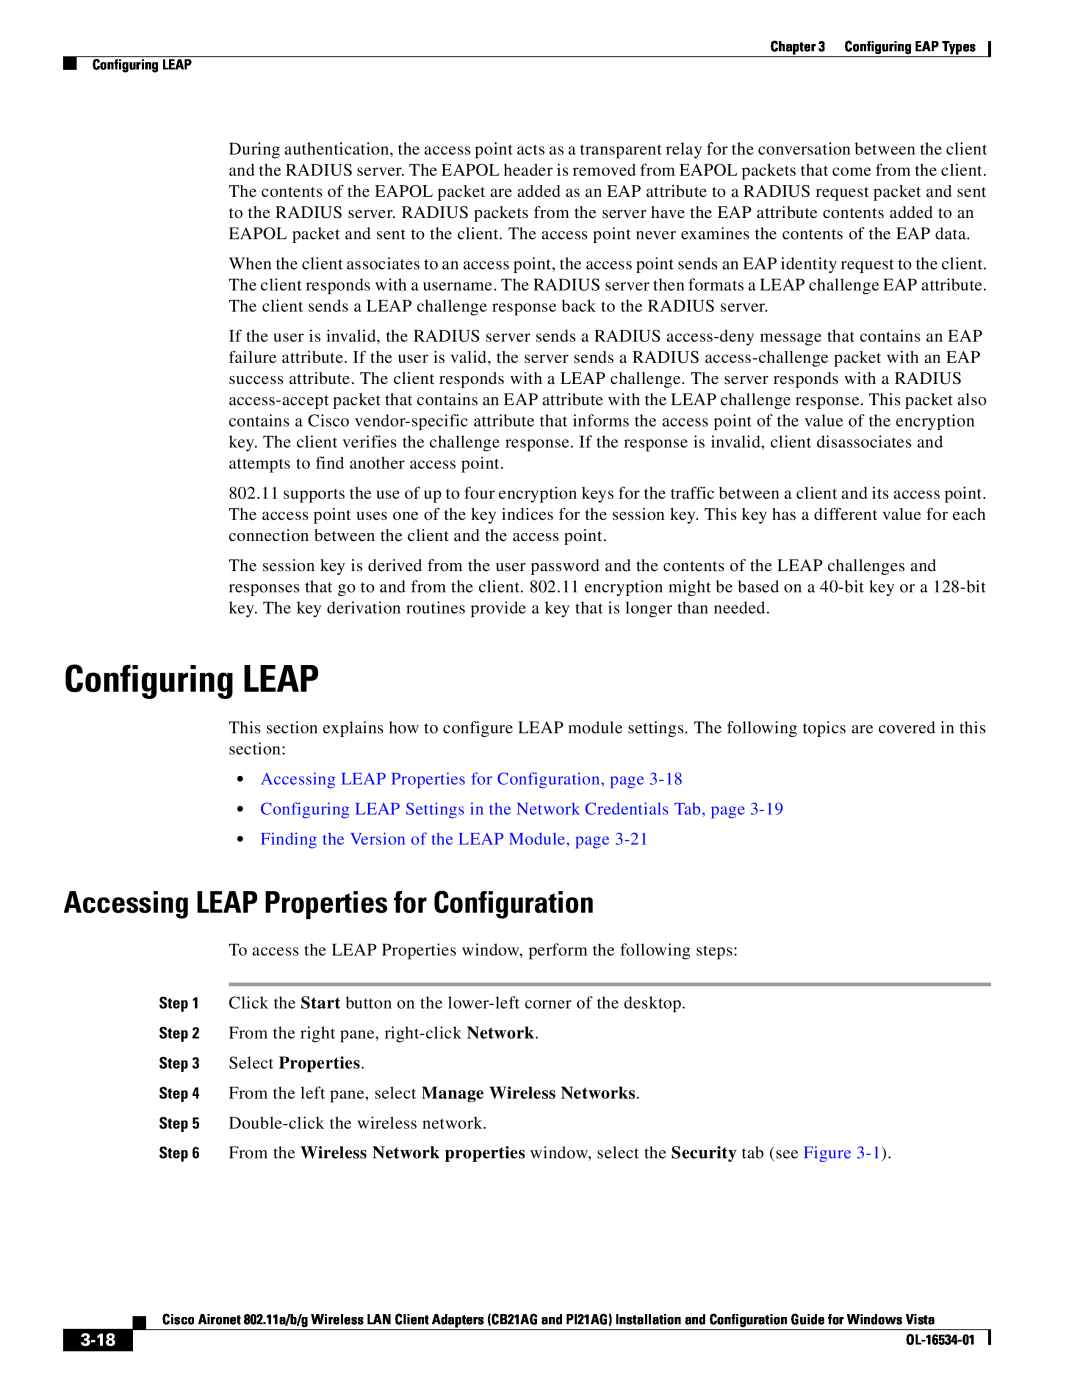 Cisco Systems PI21AG, CB21AG manual Configuring LEAP, Accessing LEAP Properties for Configuration, 3-18, Select Properties 